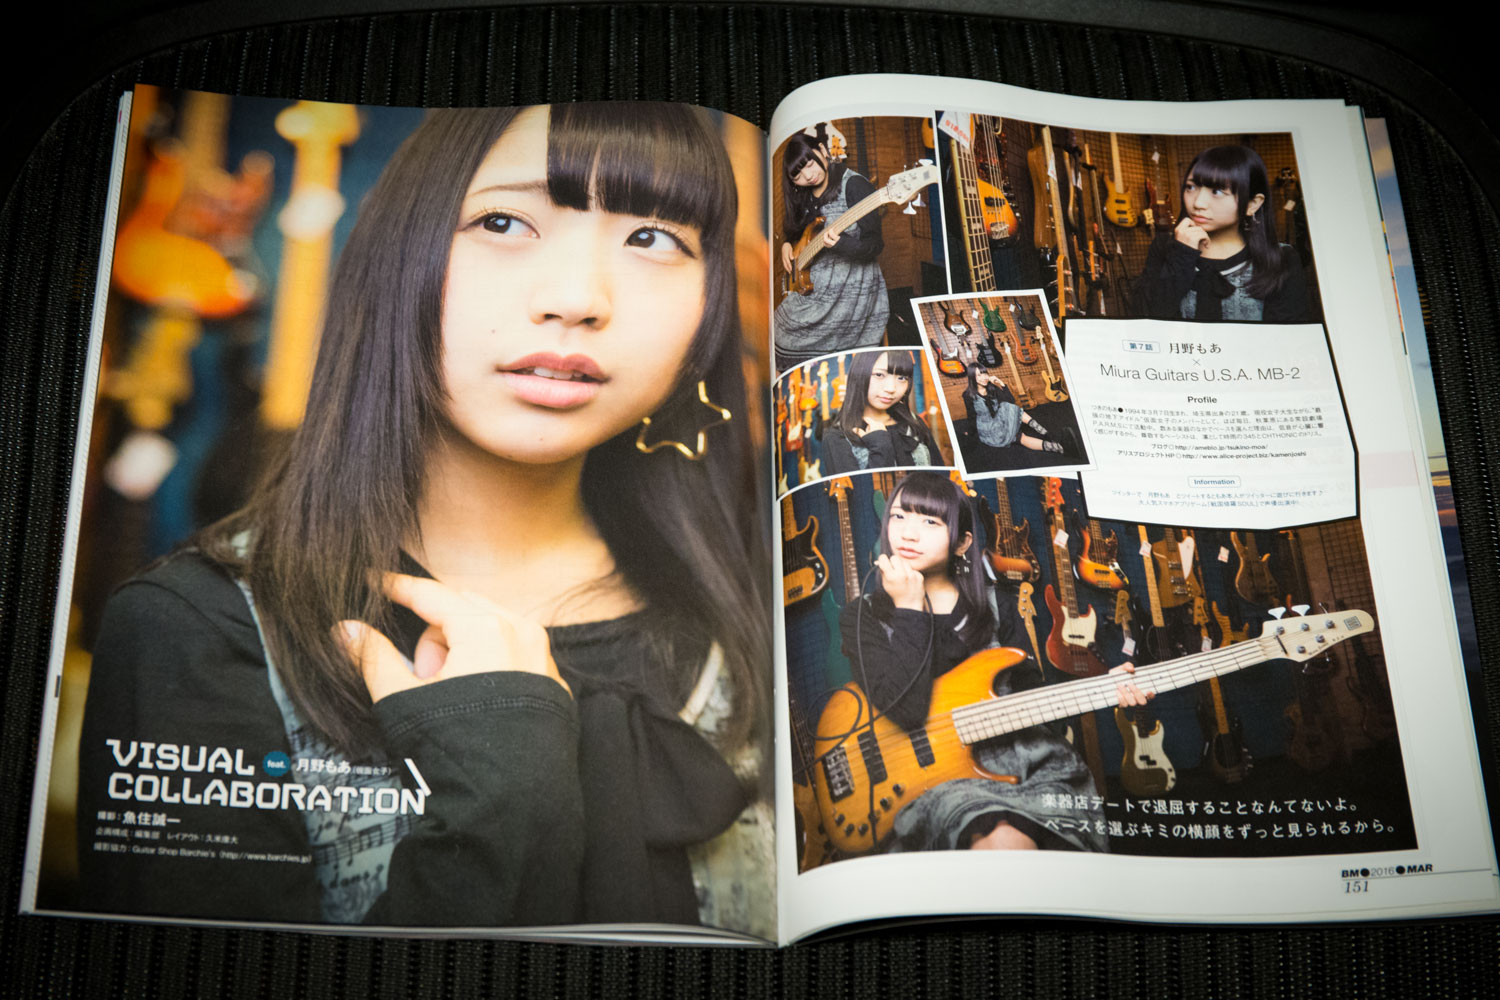 MB-2 was published in the BASS Magazine